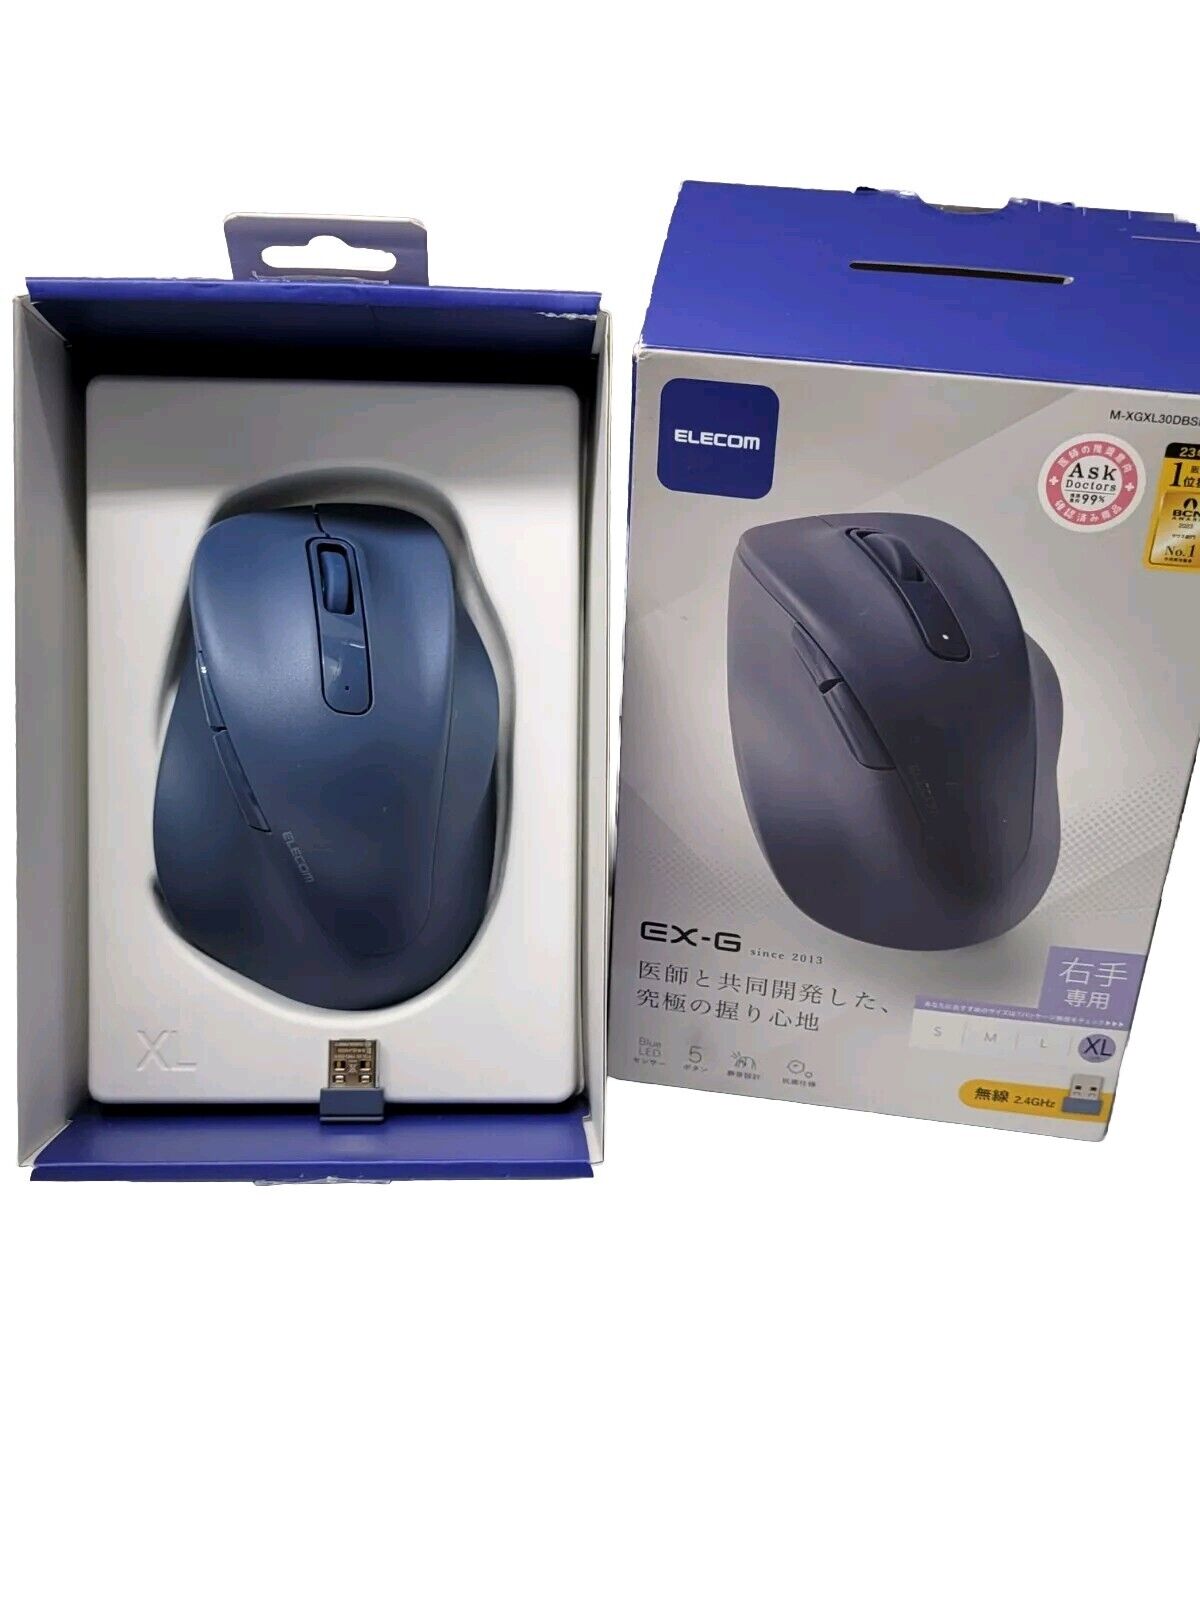 Elecom EX-G Right-Handed XL Mouse, 2.4GHz Wireless